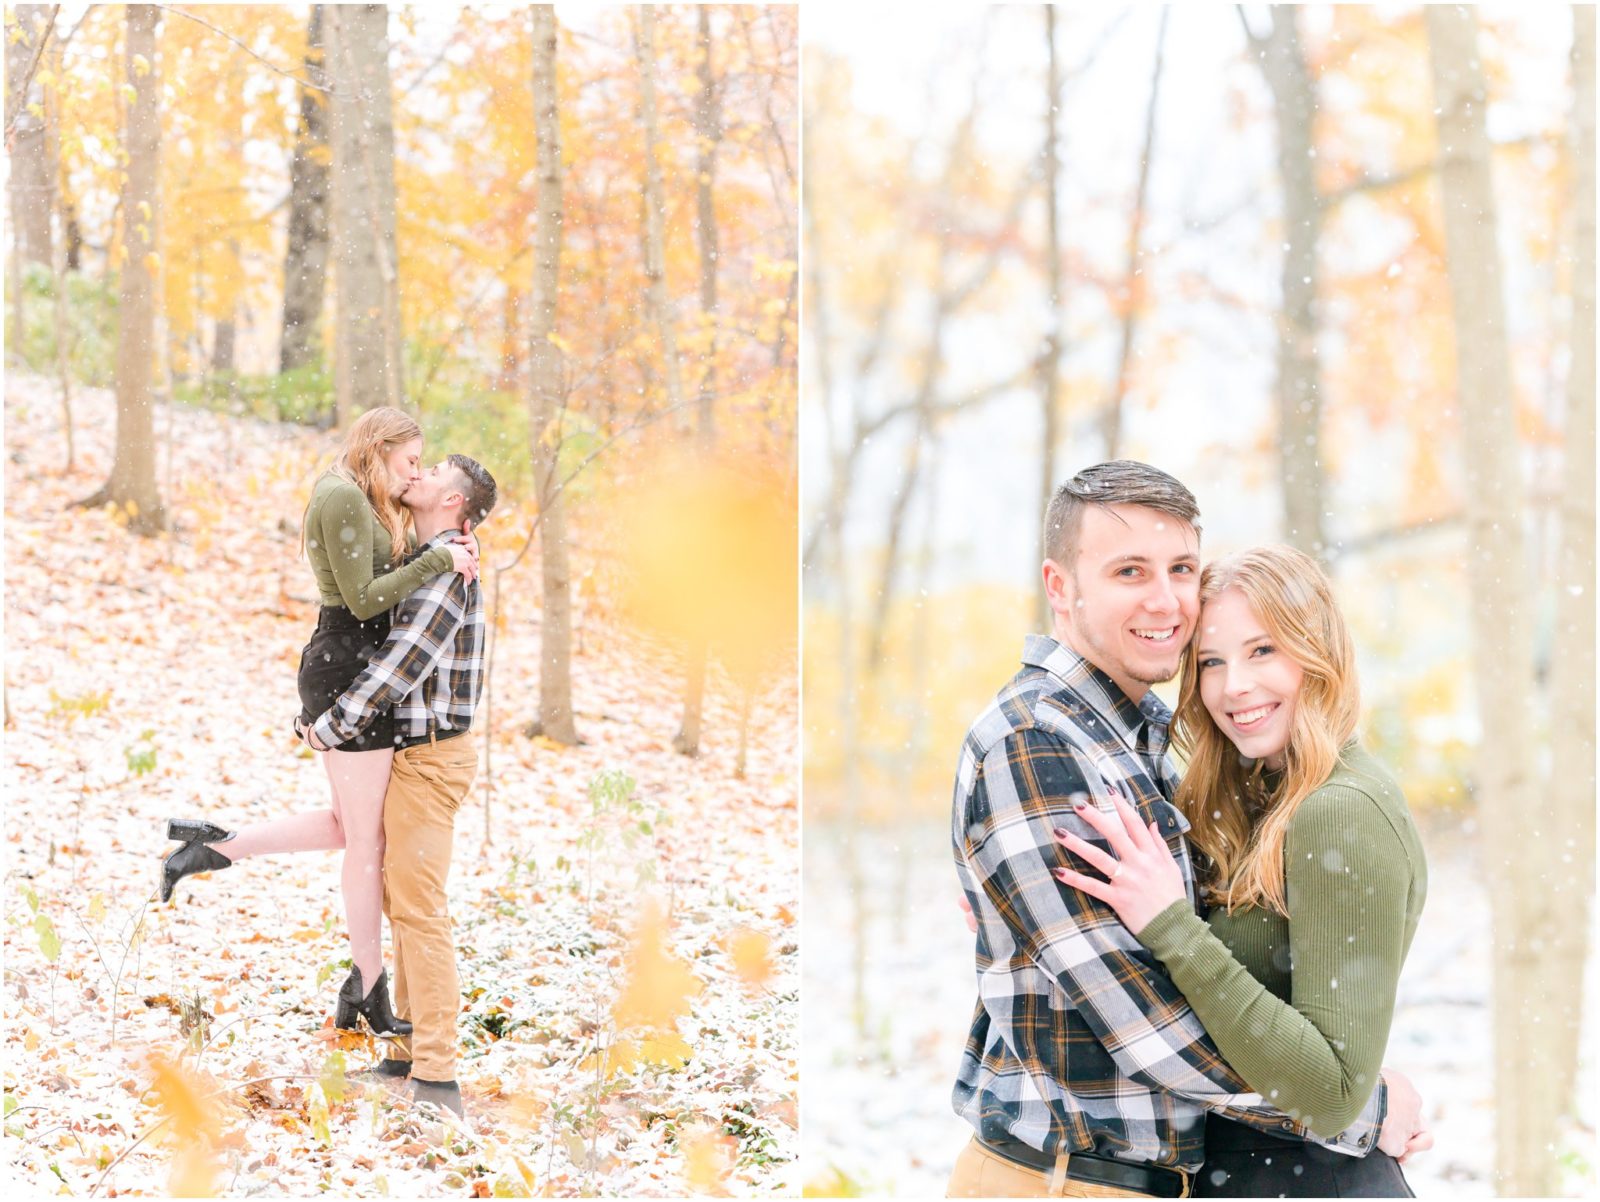 Lift kiss Holcomb Gardens engagement session in the snow